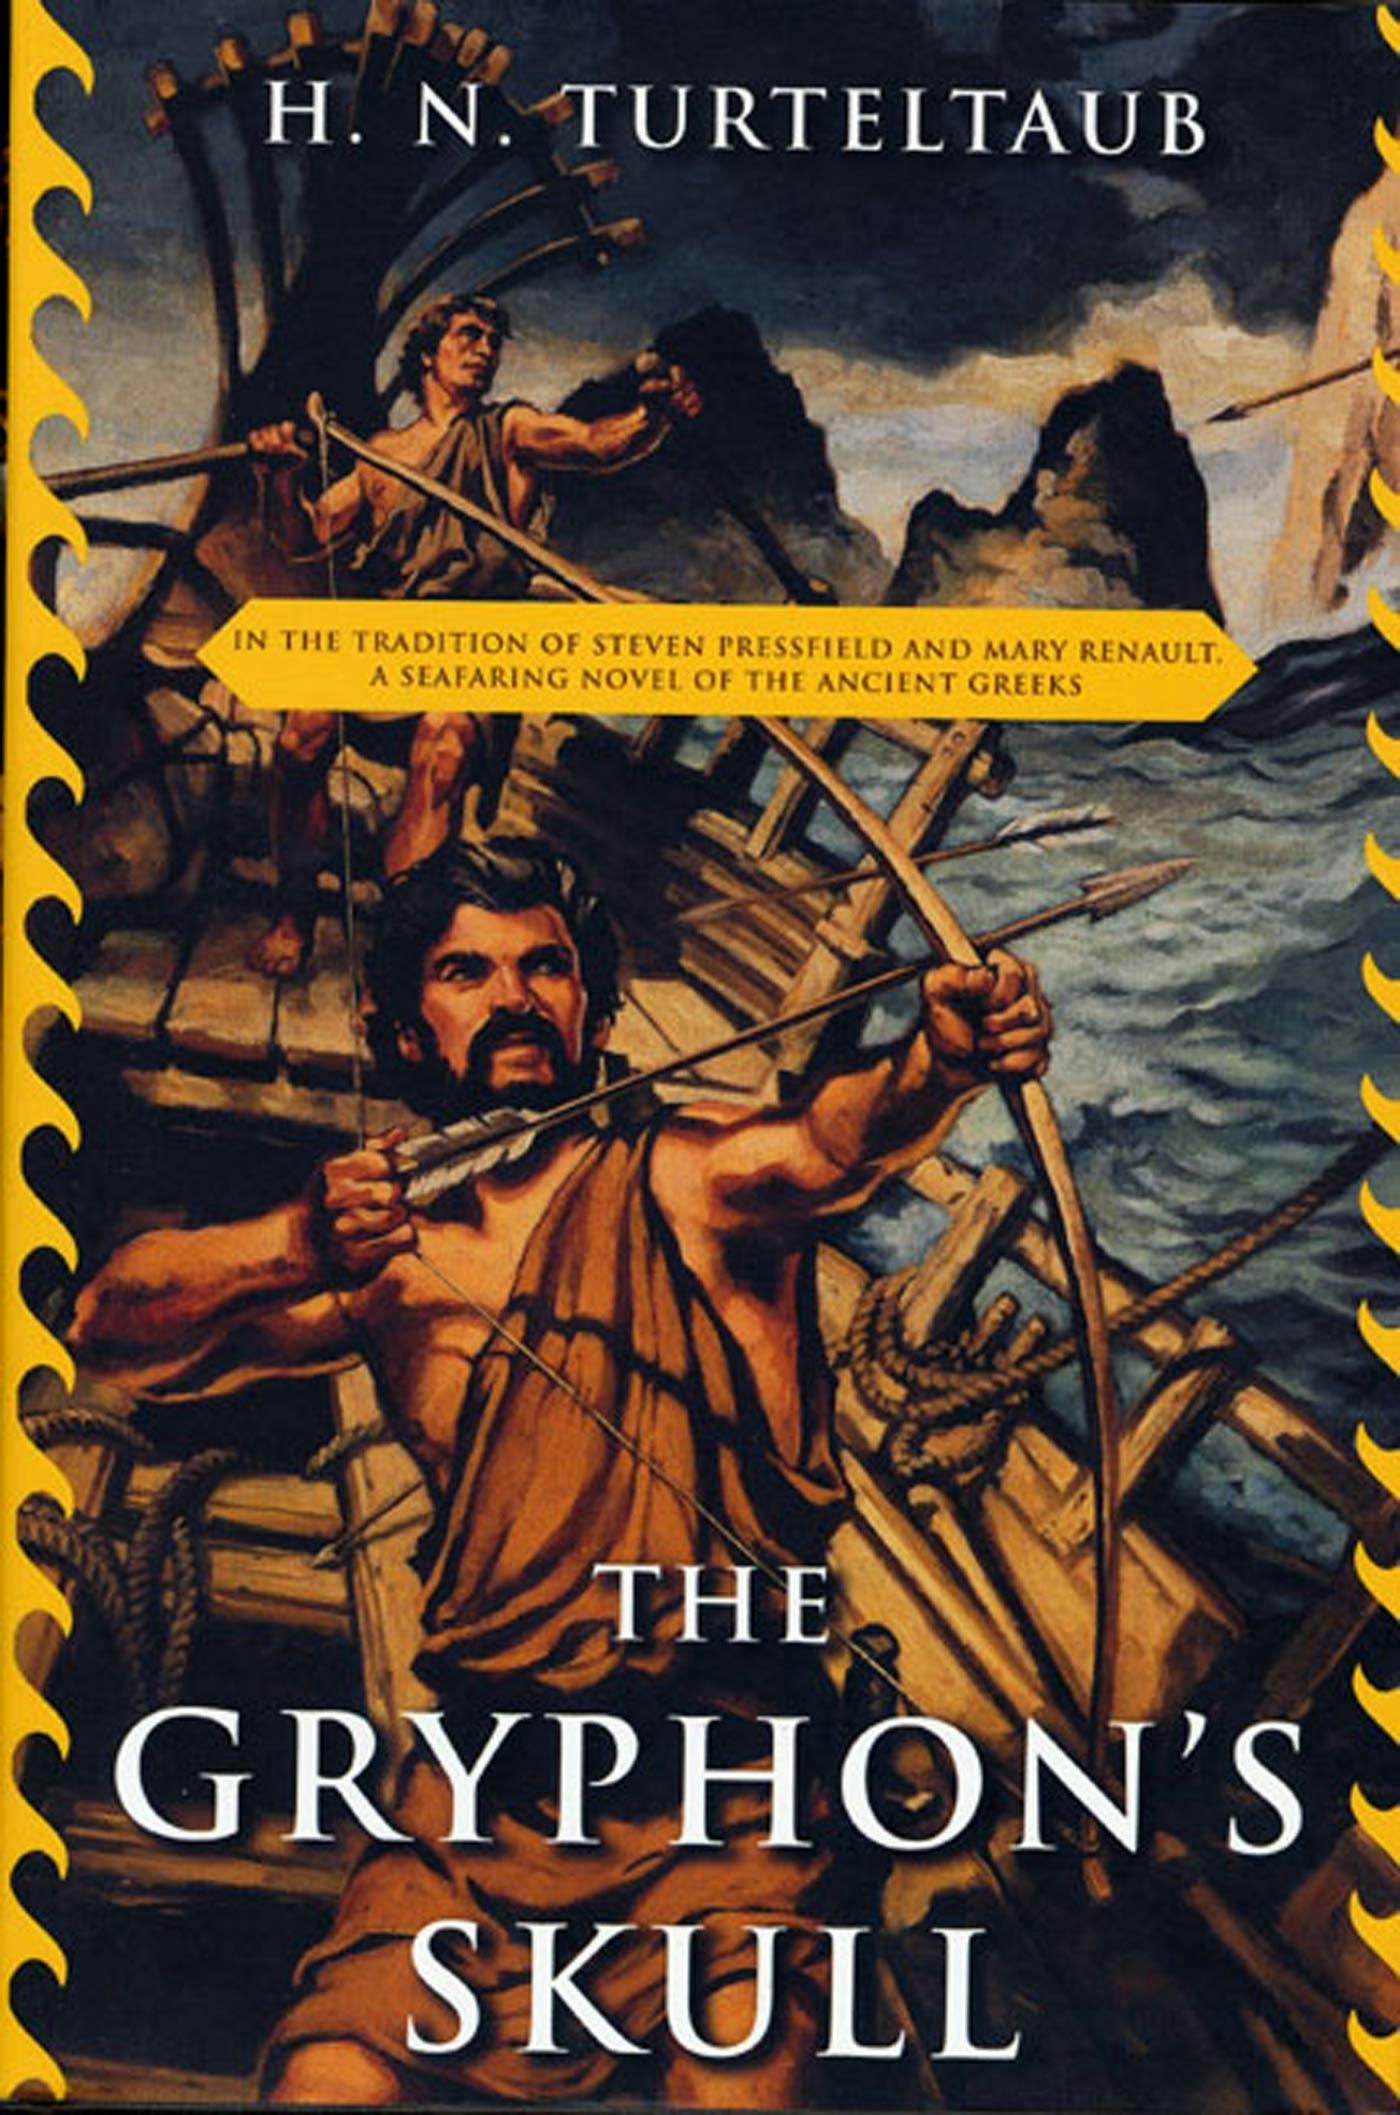 Cover for the book titled as: The Gryphon's Skull